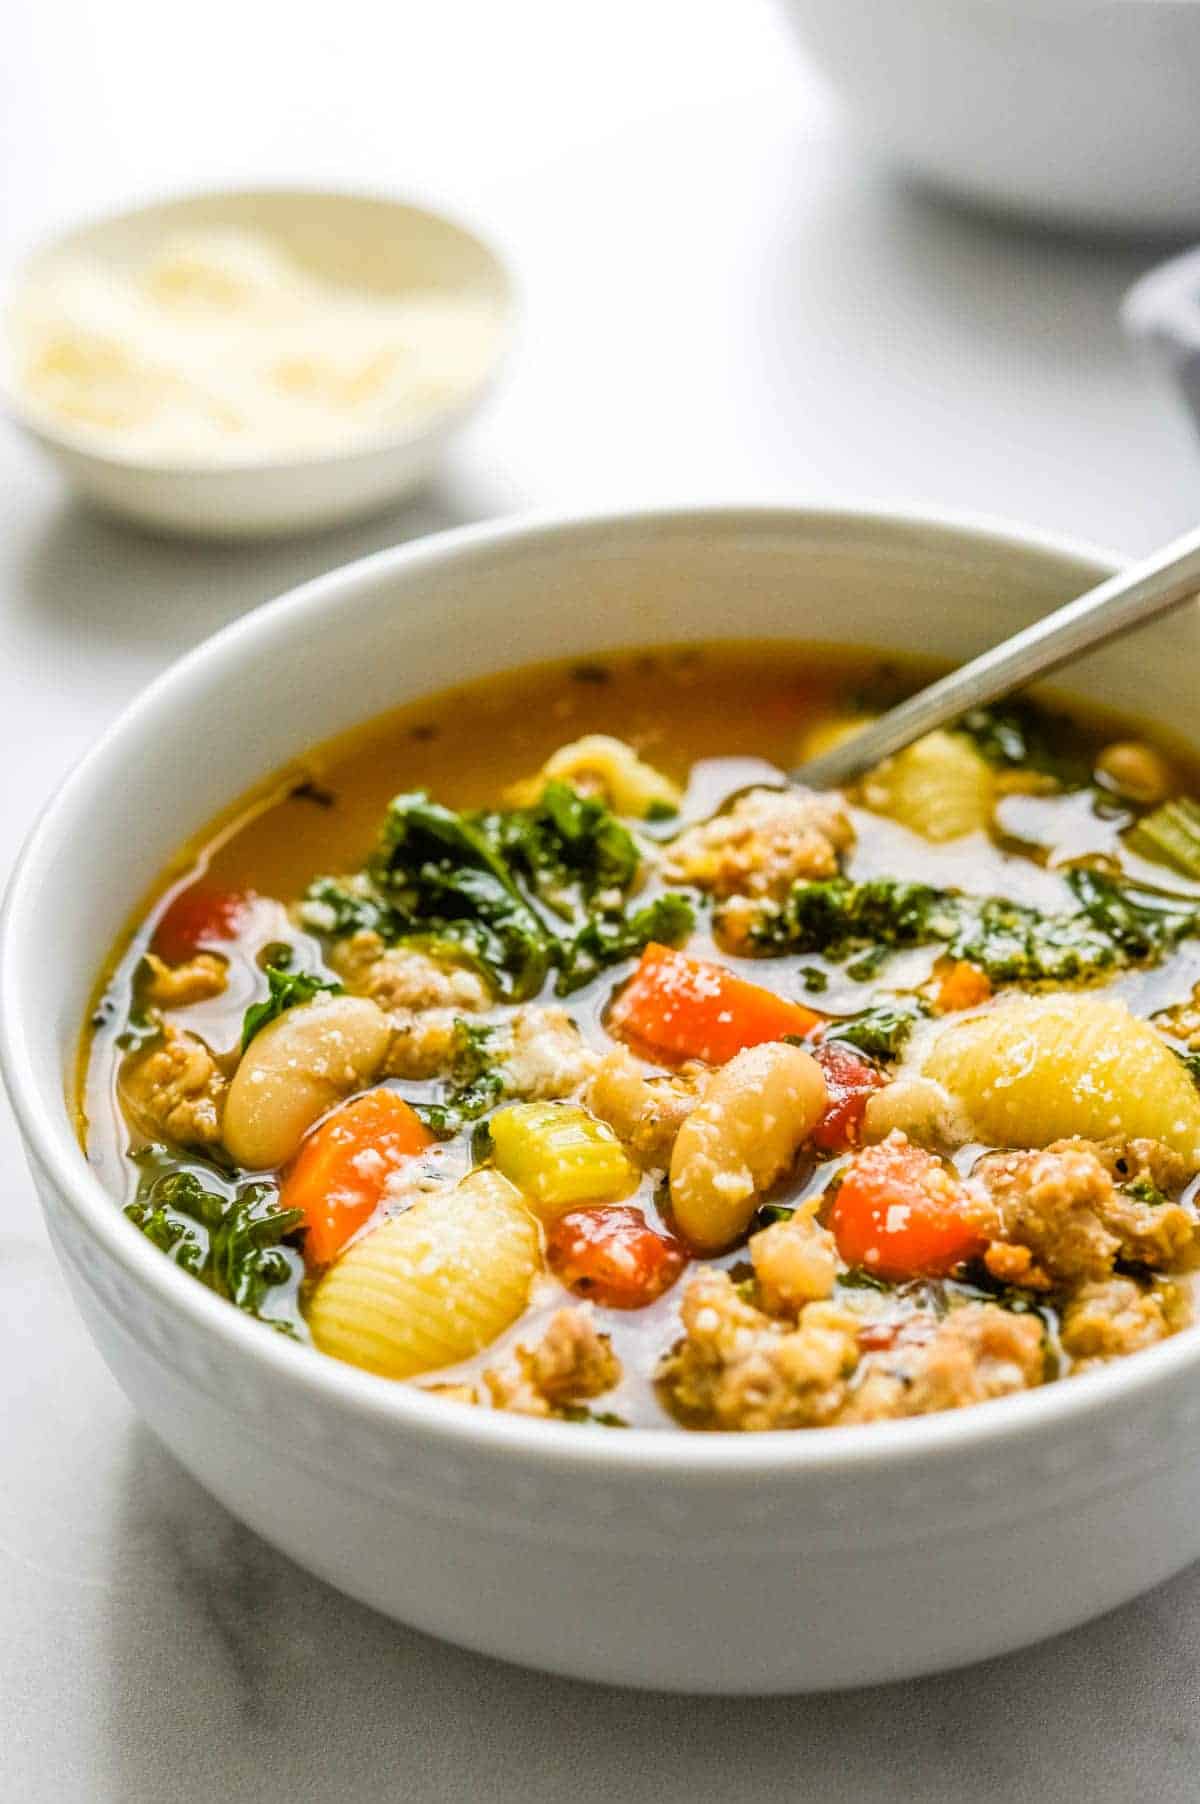 A bowl of hearty soup with tender meat and a medley of fresh vegetables.